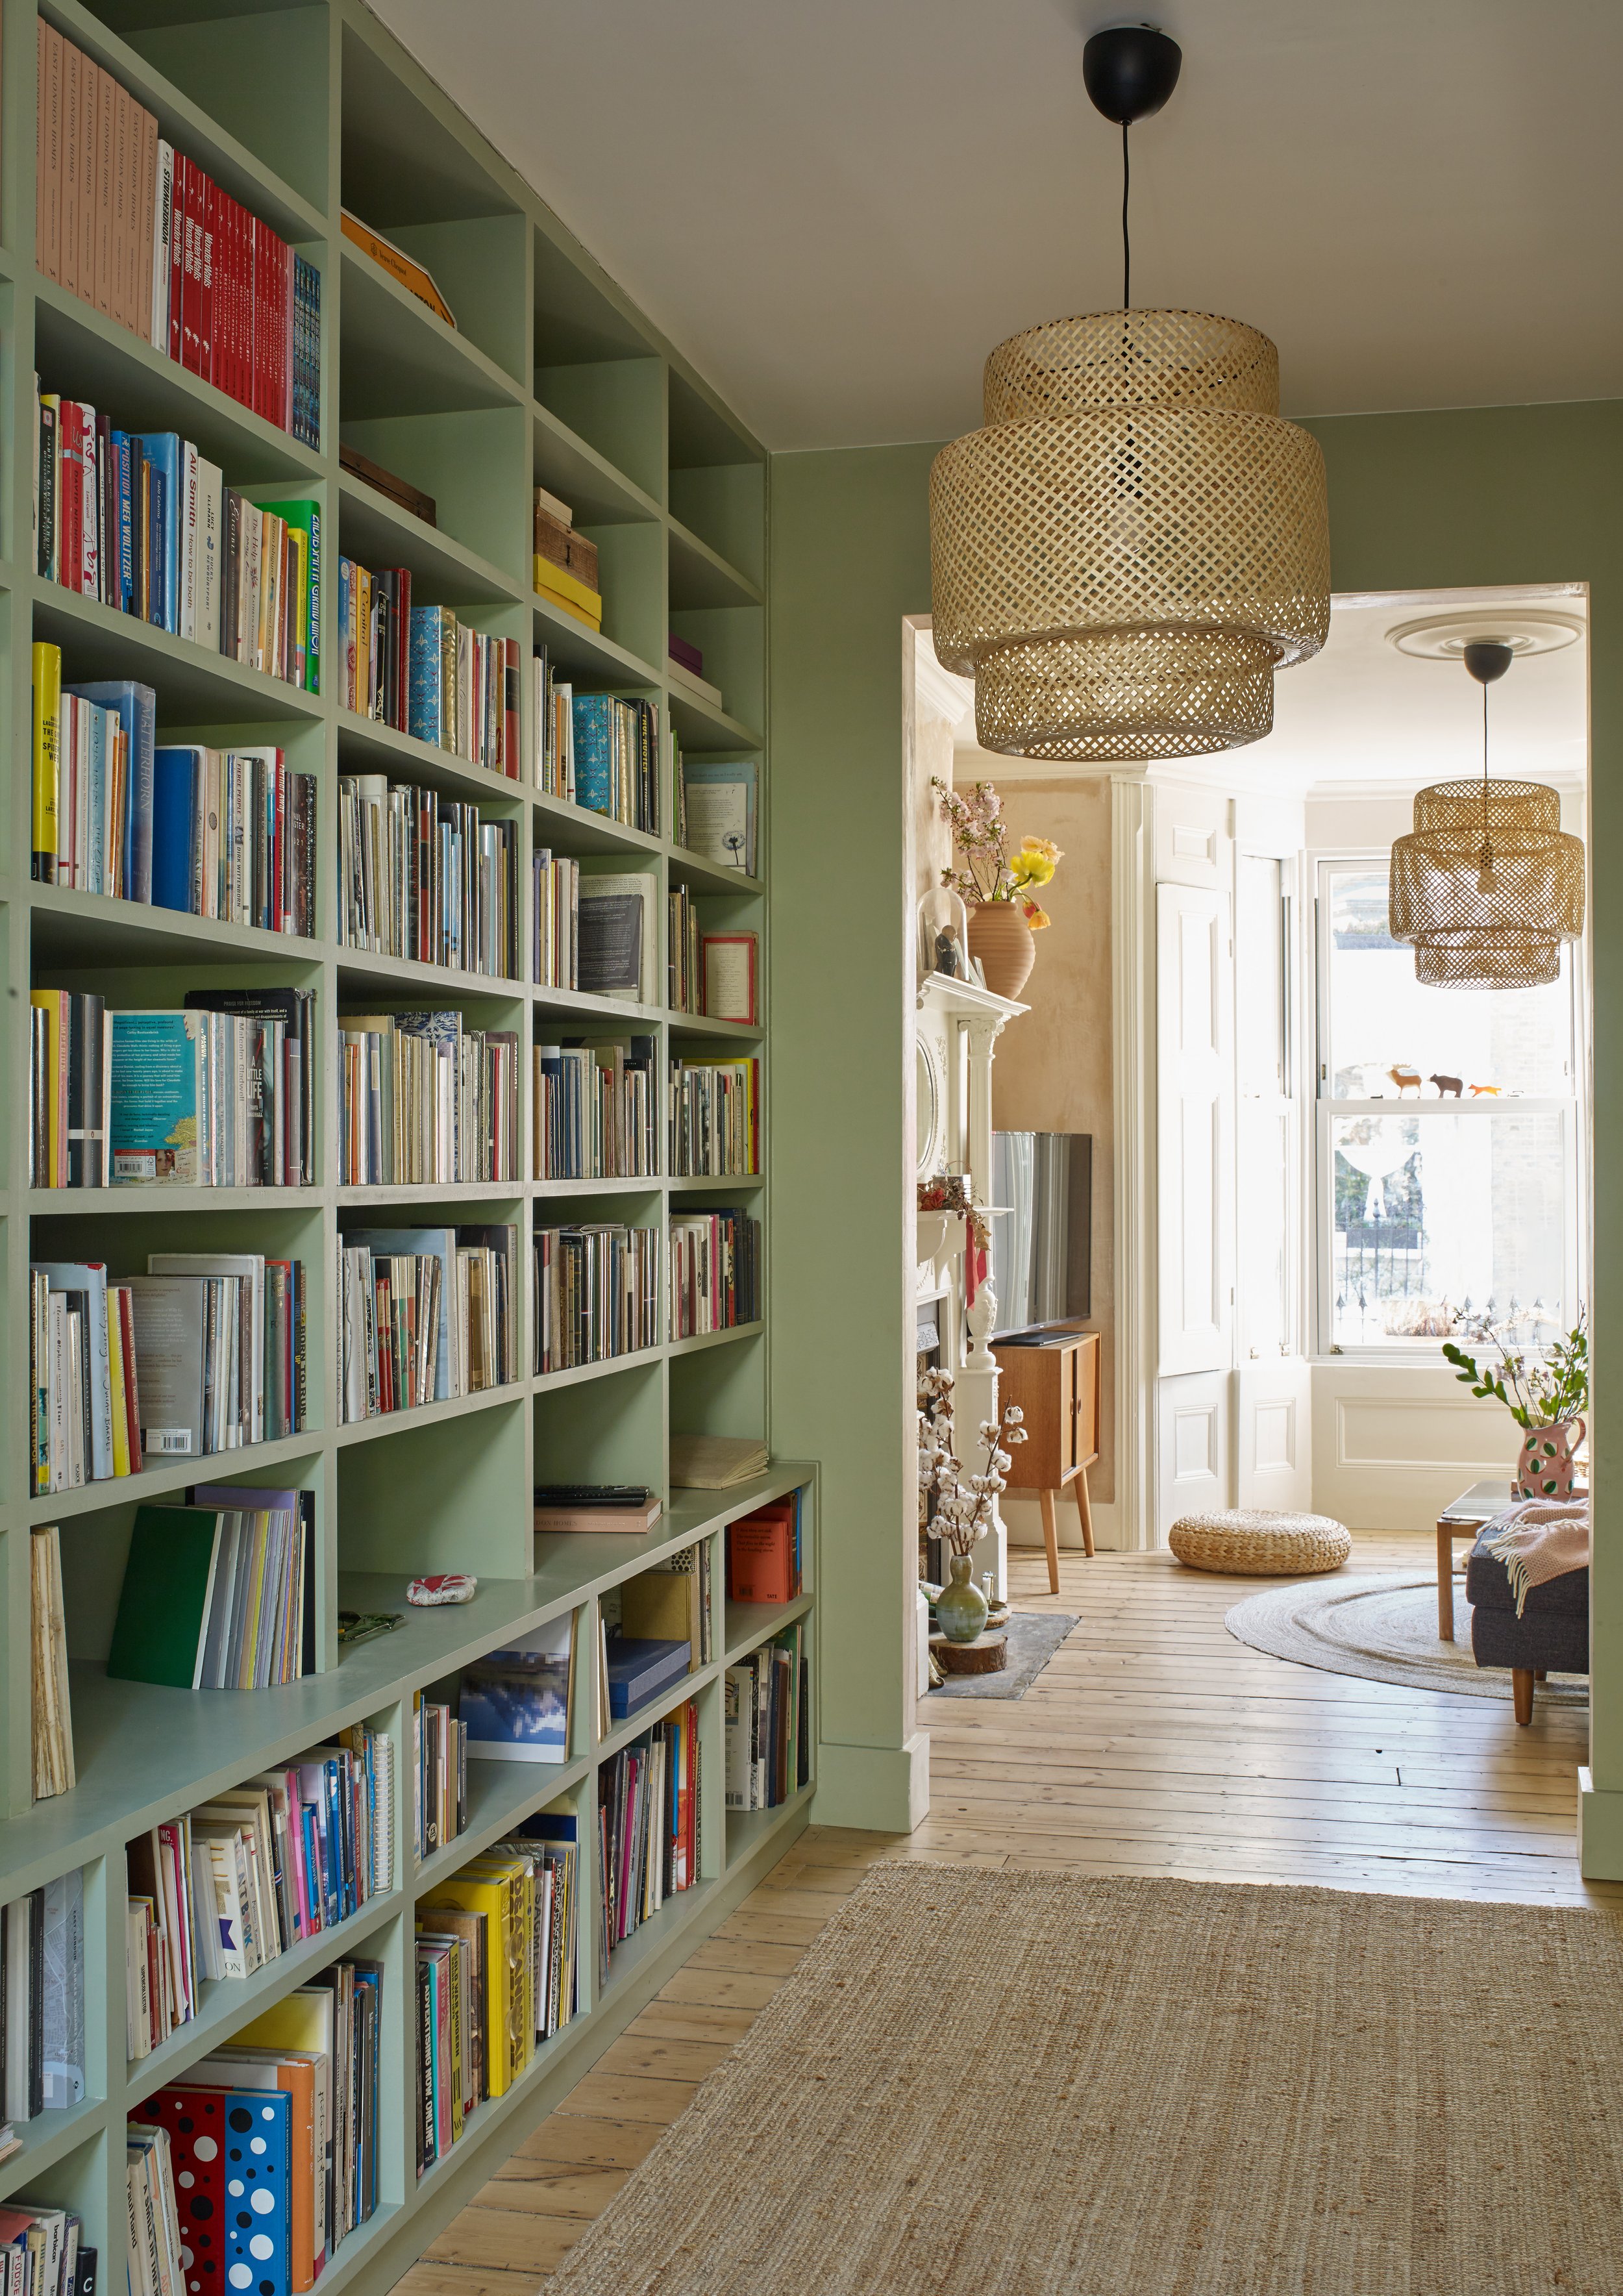 Floor to ceiling book shelving